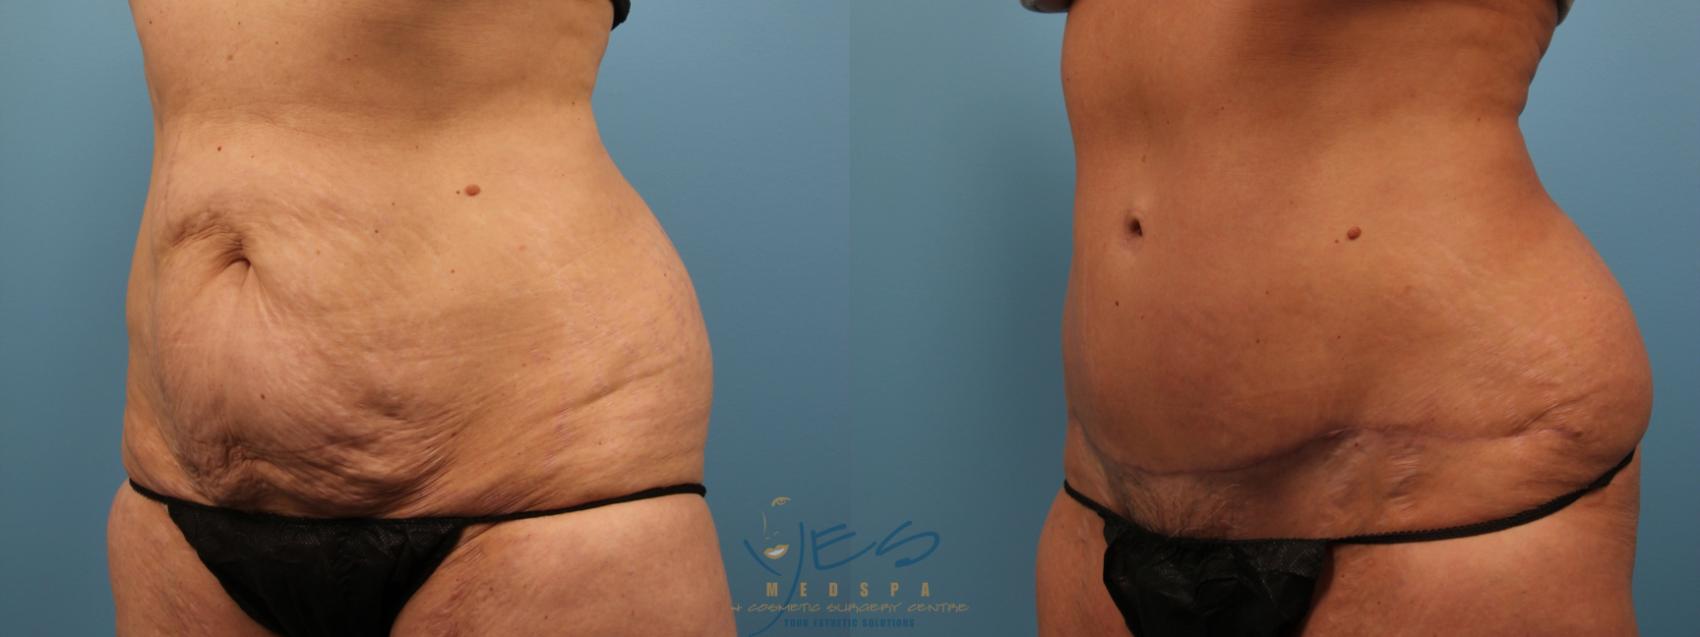 Before & After Tummy Tuck Case 135 Left Oblique View in Vancouver, BC